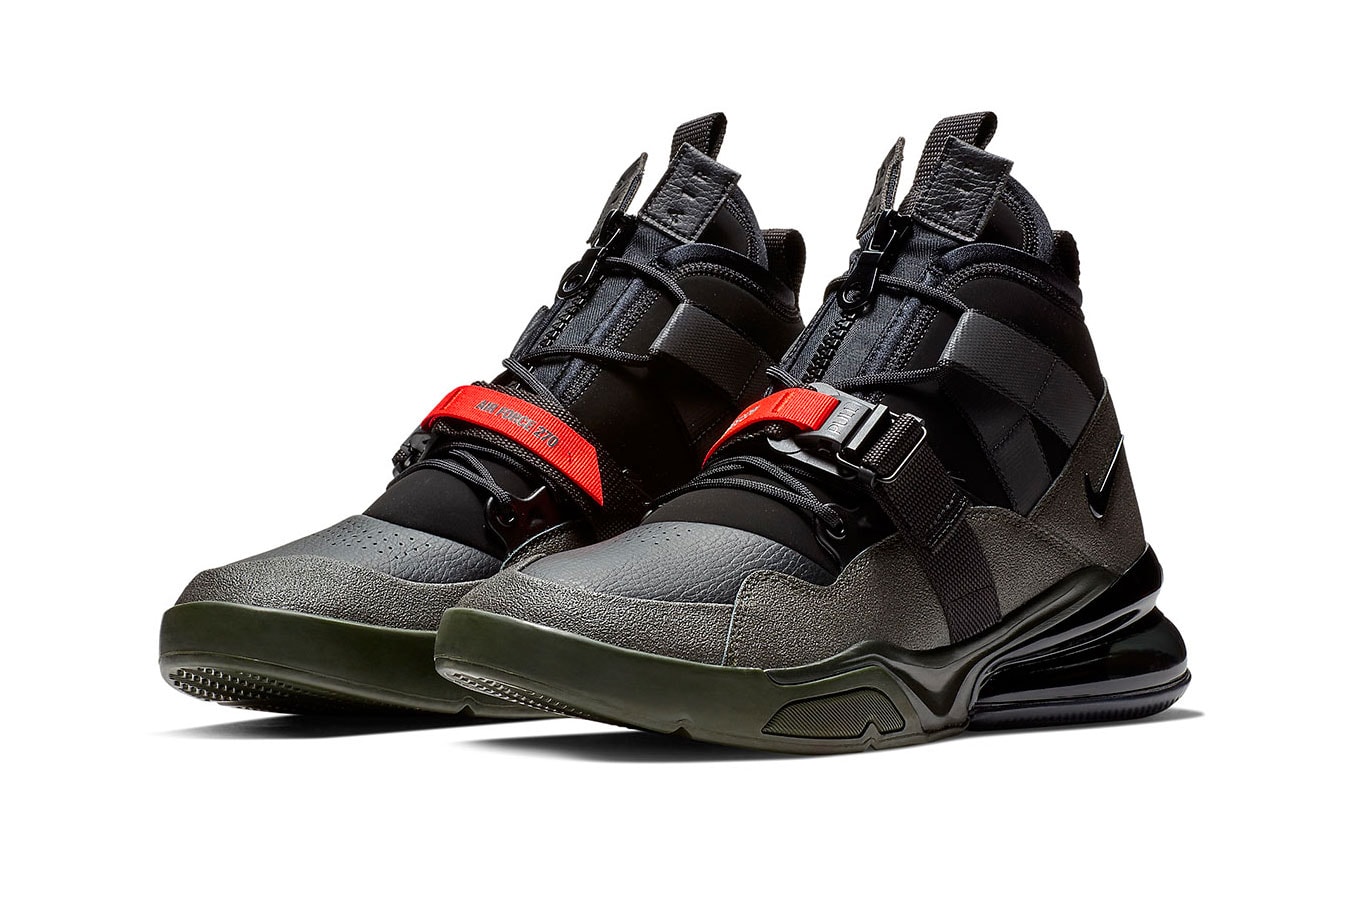 Nike Air Force 270 Utility "Sequoia/Habanero Red" release date info sneaker colorway november 2018 price black red